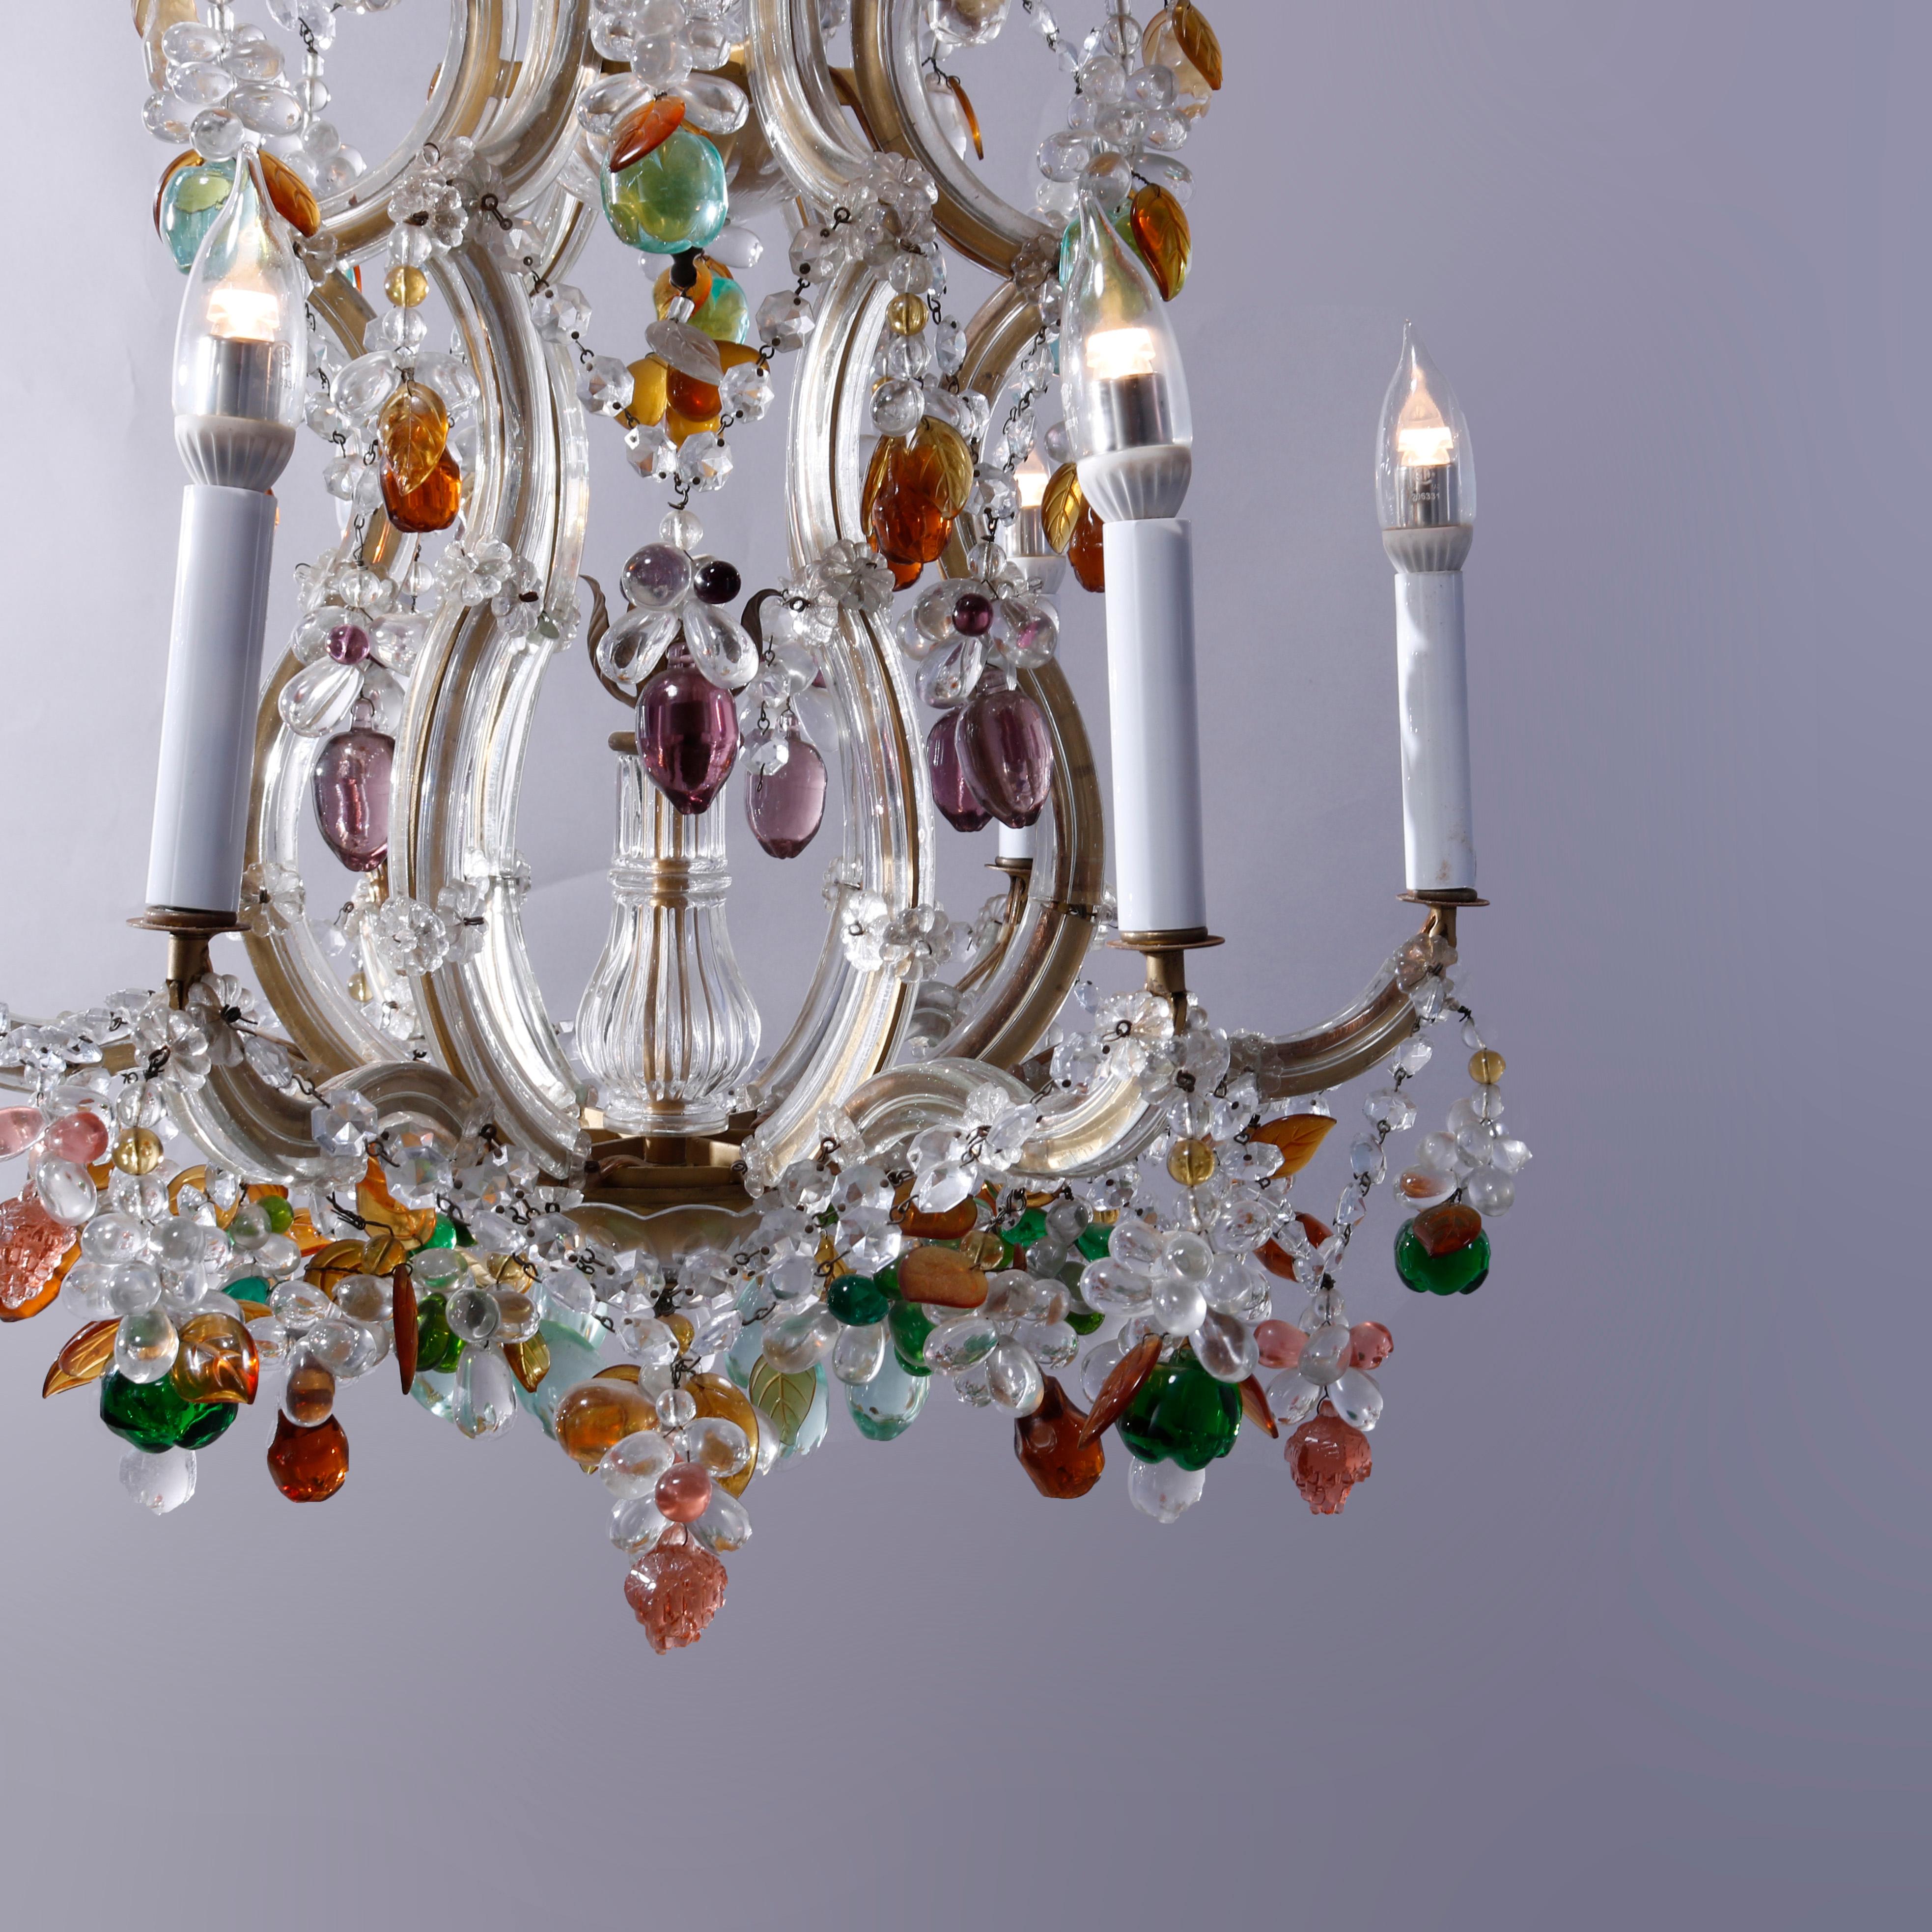 20th Century Antique French Style Crystal Chandelier with Polychromed Prisms, circa 1940